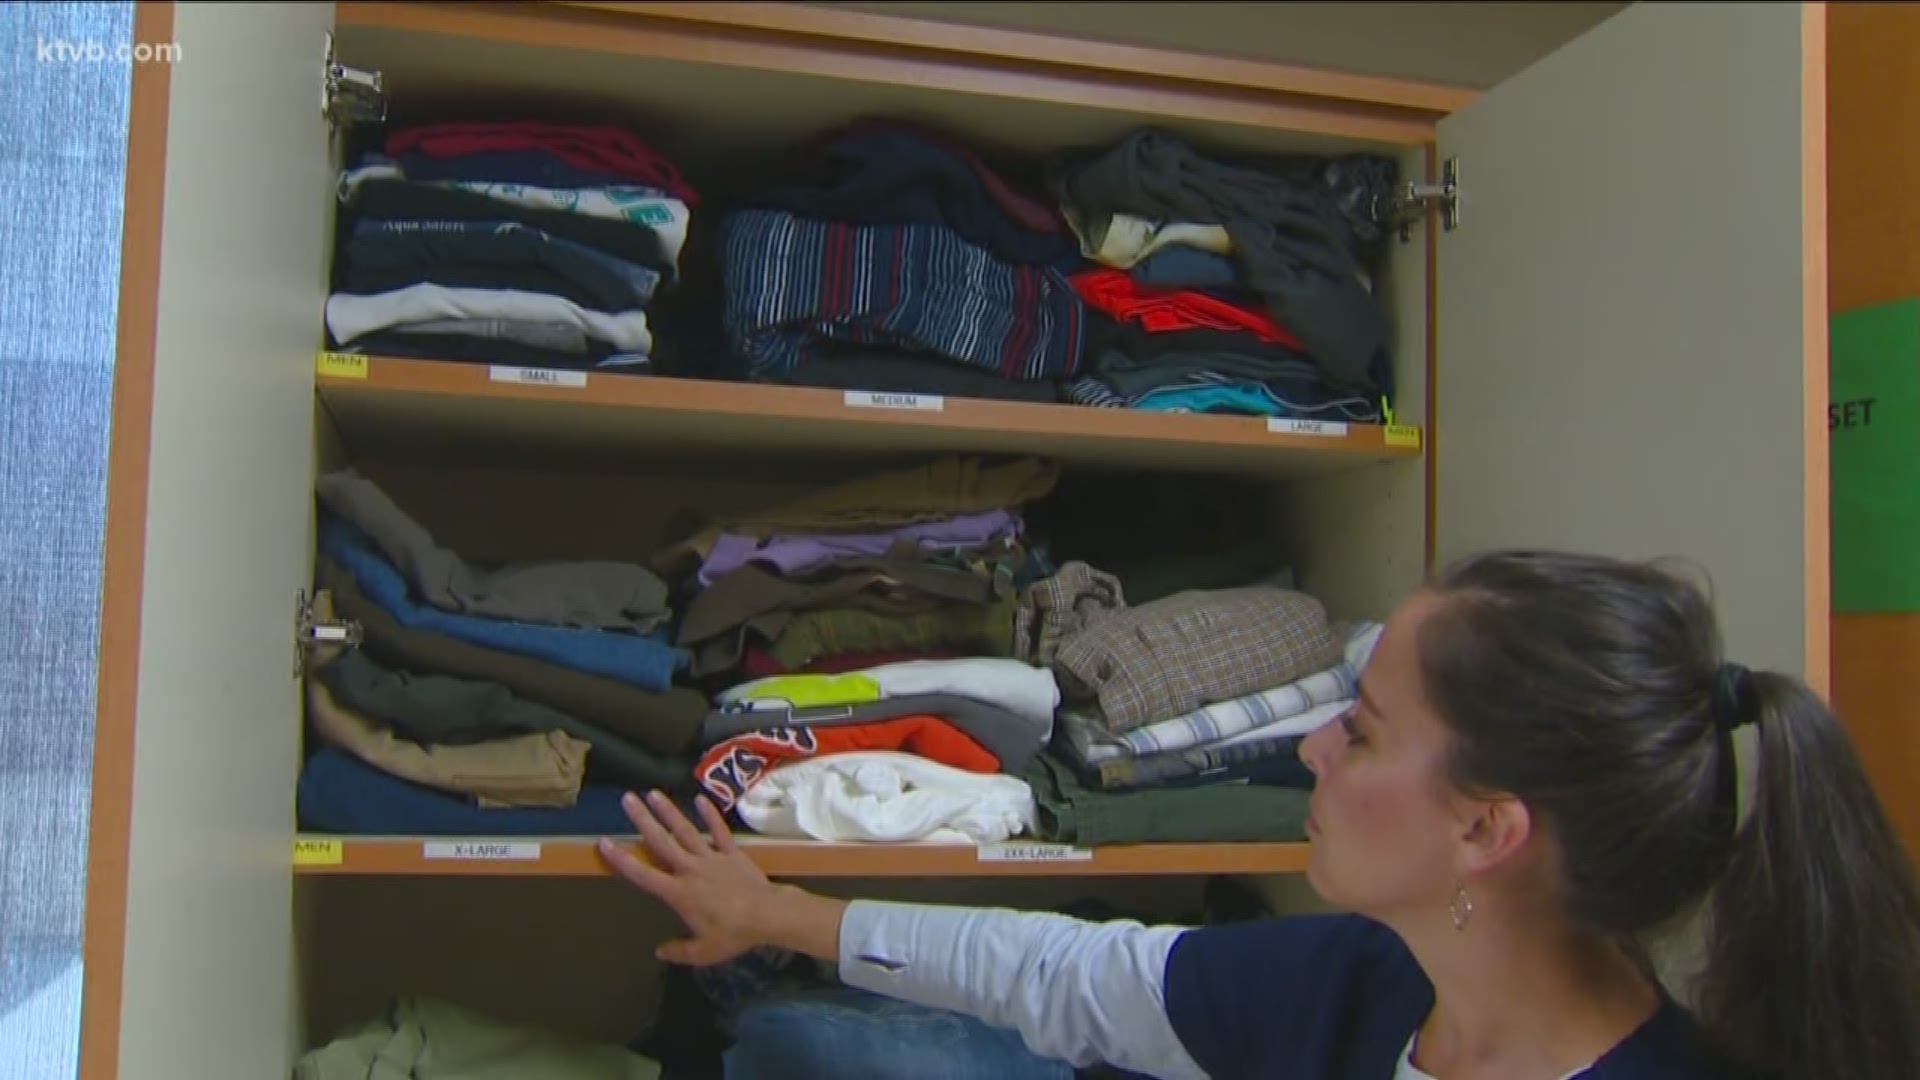 St. Luke's nurse Celeste Benedict started a program to make sure all patients have clothes they can wear home after a stay in the hospital.